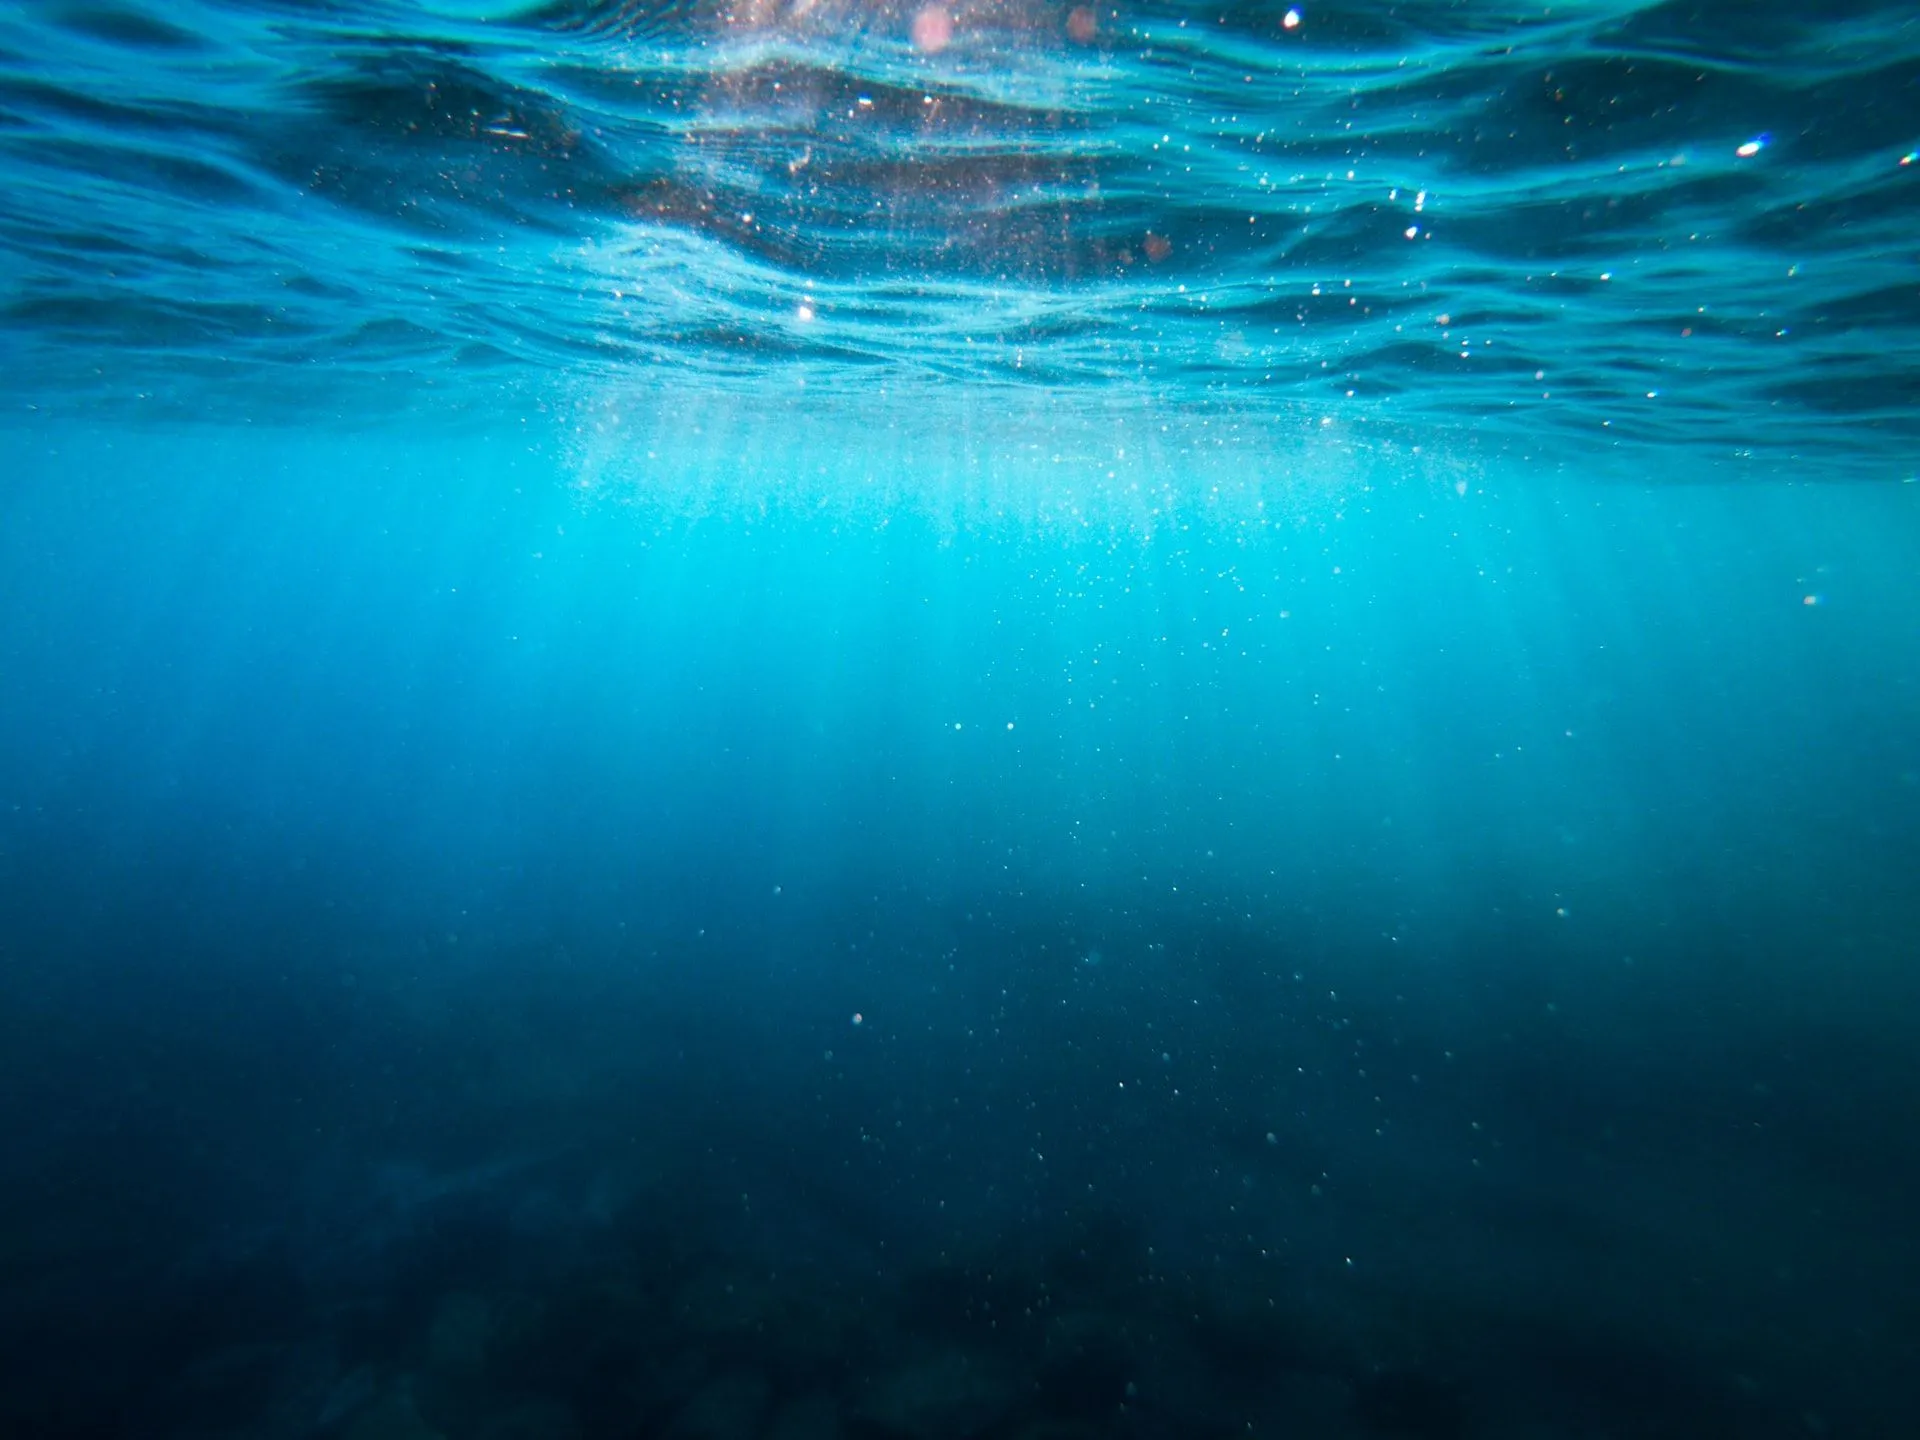 Did you know that more than half of the Earth's oxygen comes from saltwater bodies?